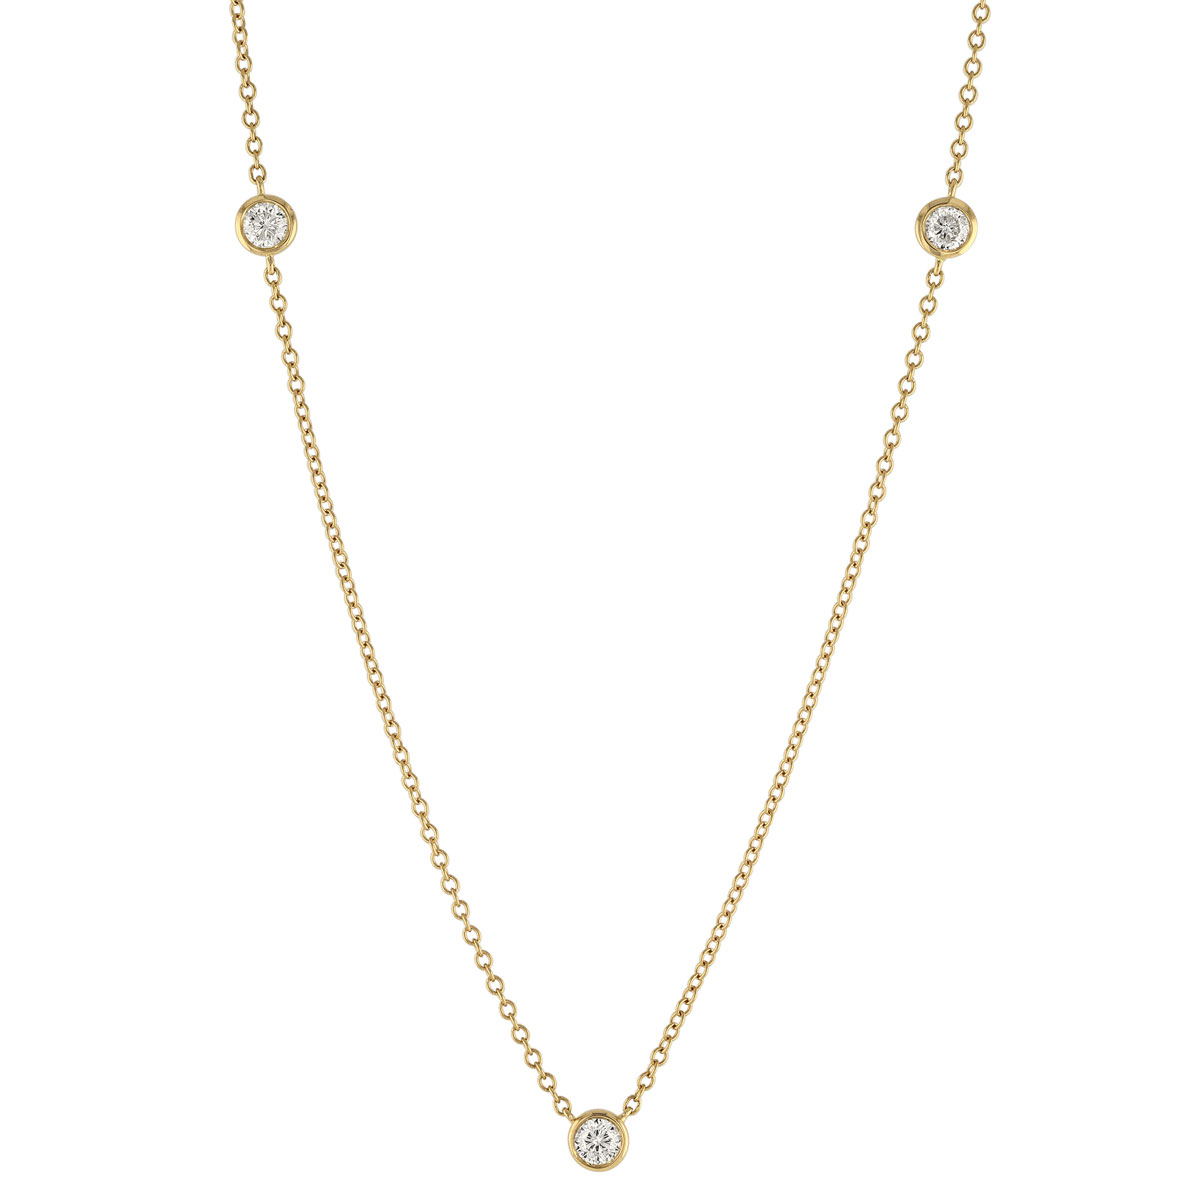 Round Diamond 3 Station Necklace in Yellow Gold | Borsheims